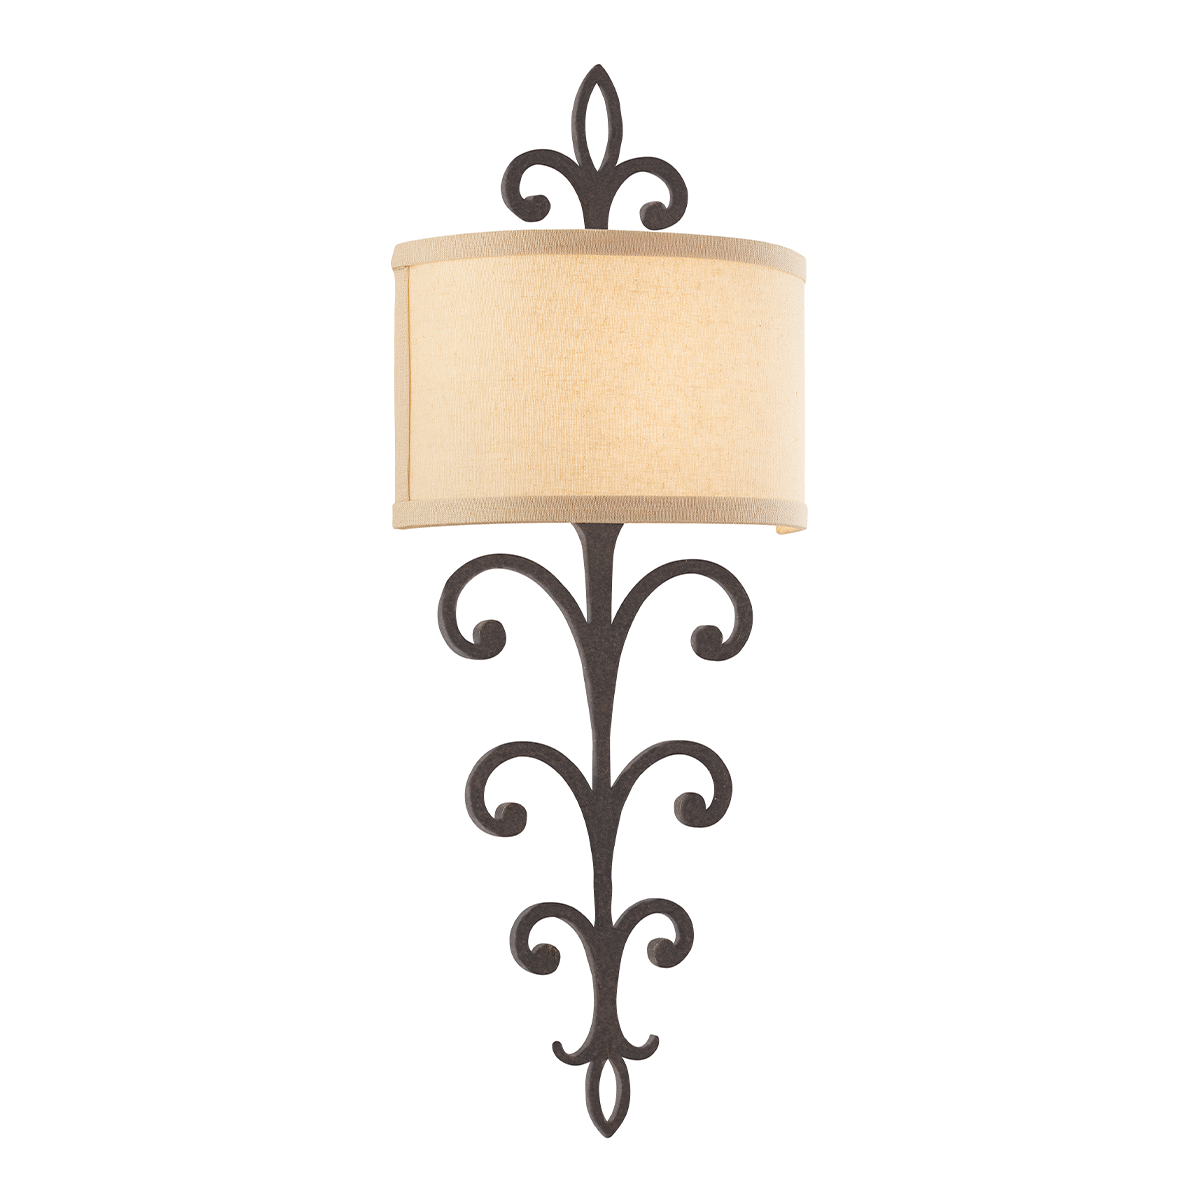 Troy Lighting Crawford Wall Sconce Wall Sconce Troy Lighting HERITAGE BRONZE 11x11x25.75 